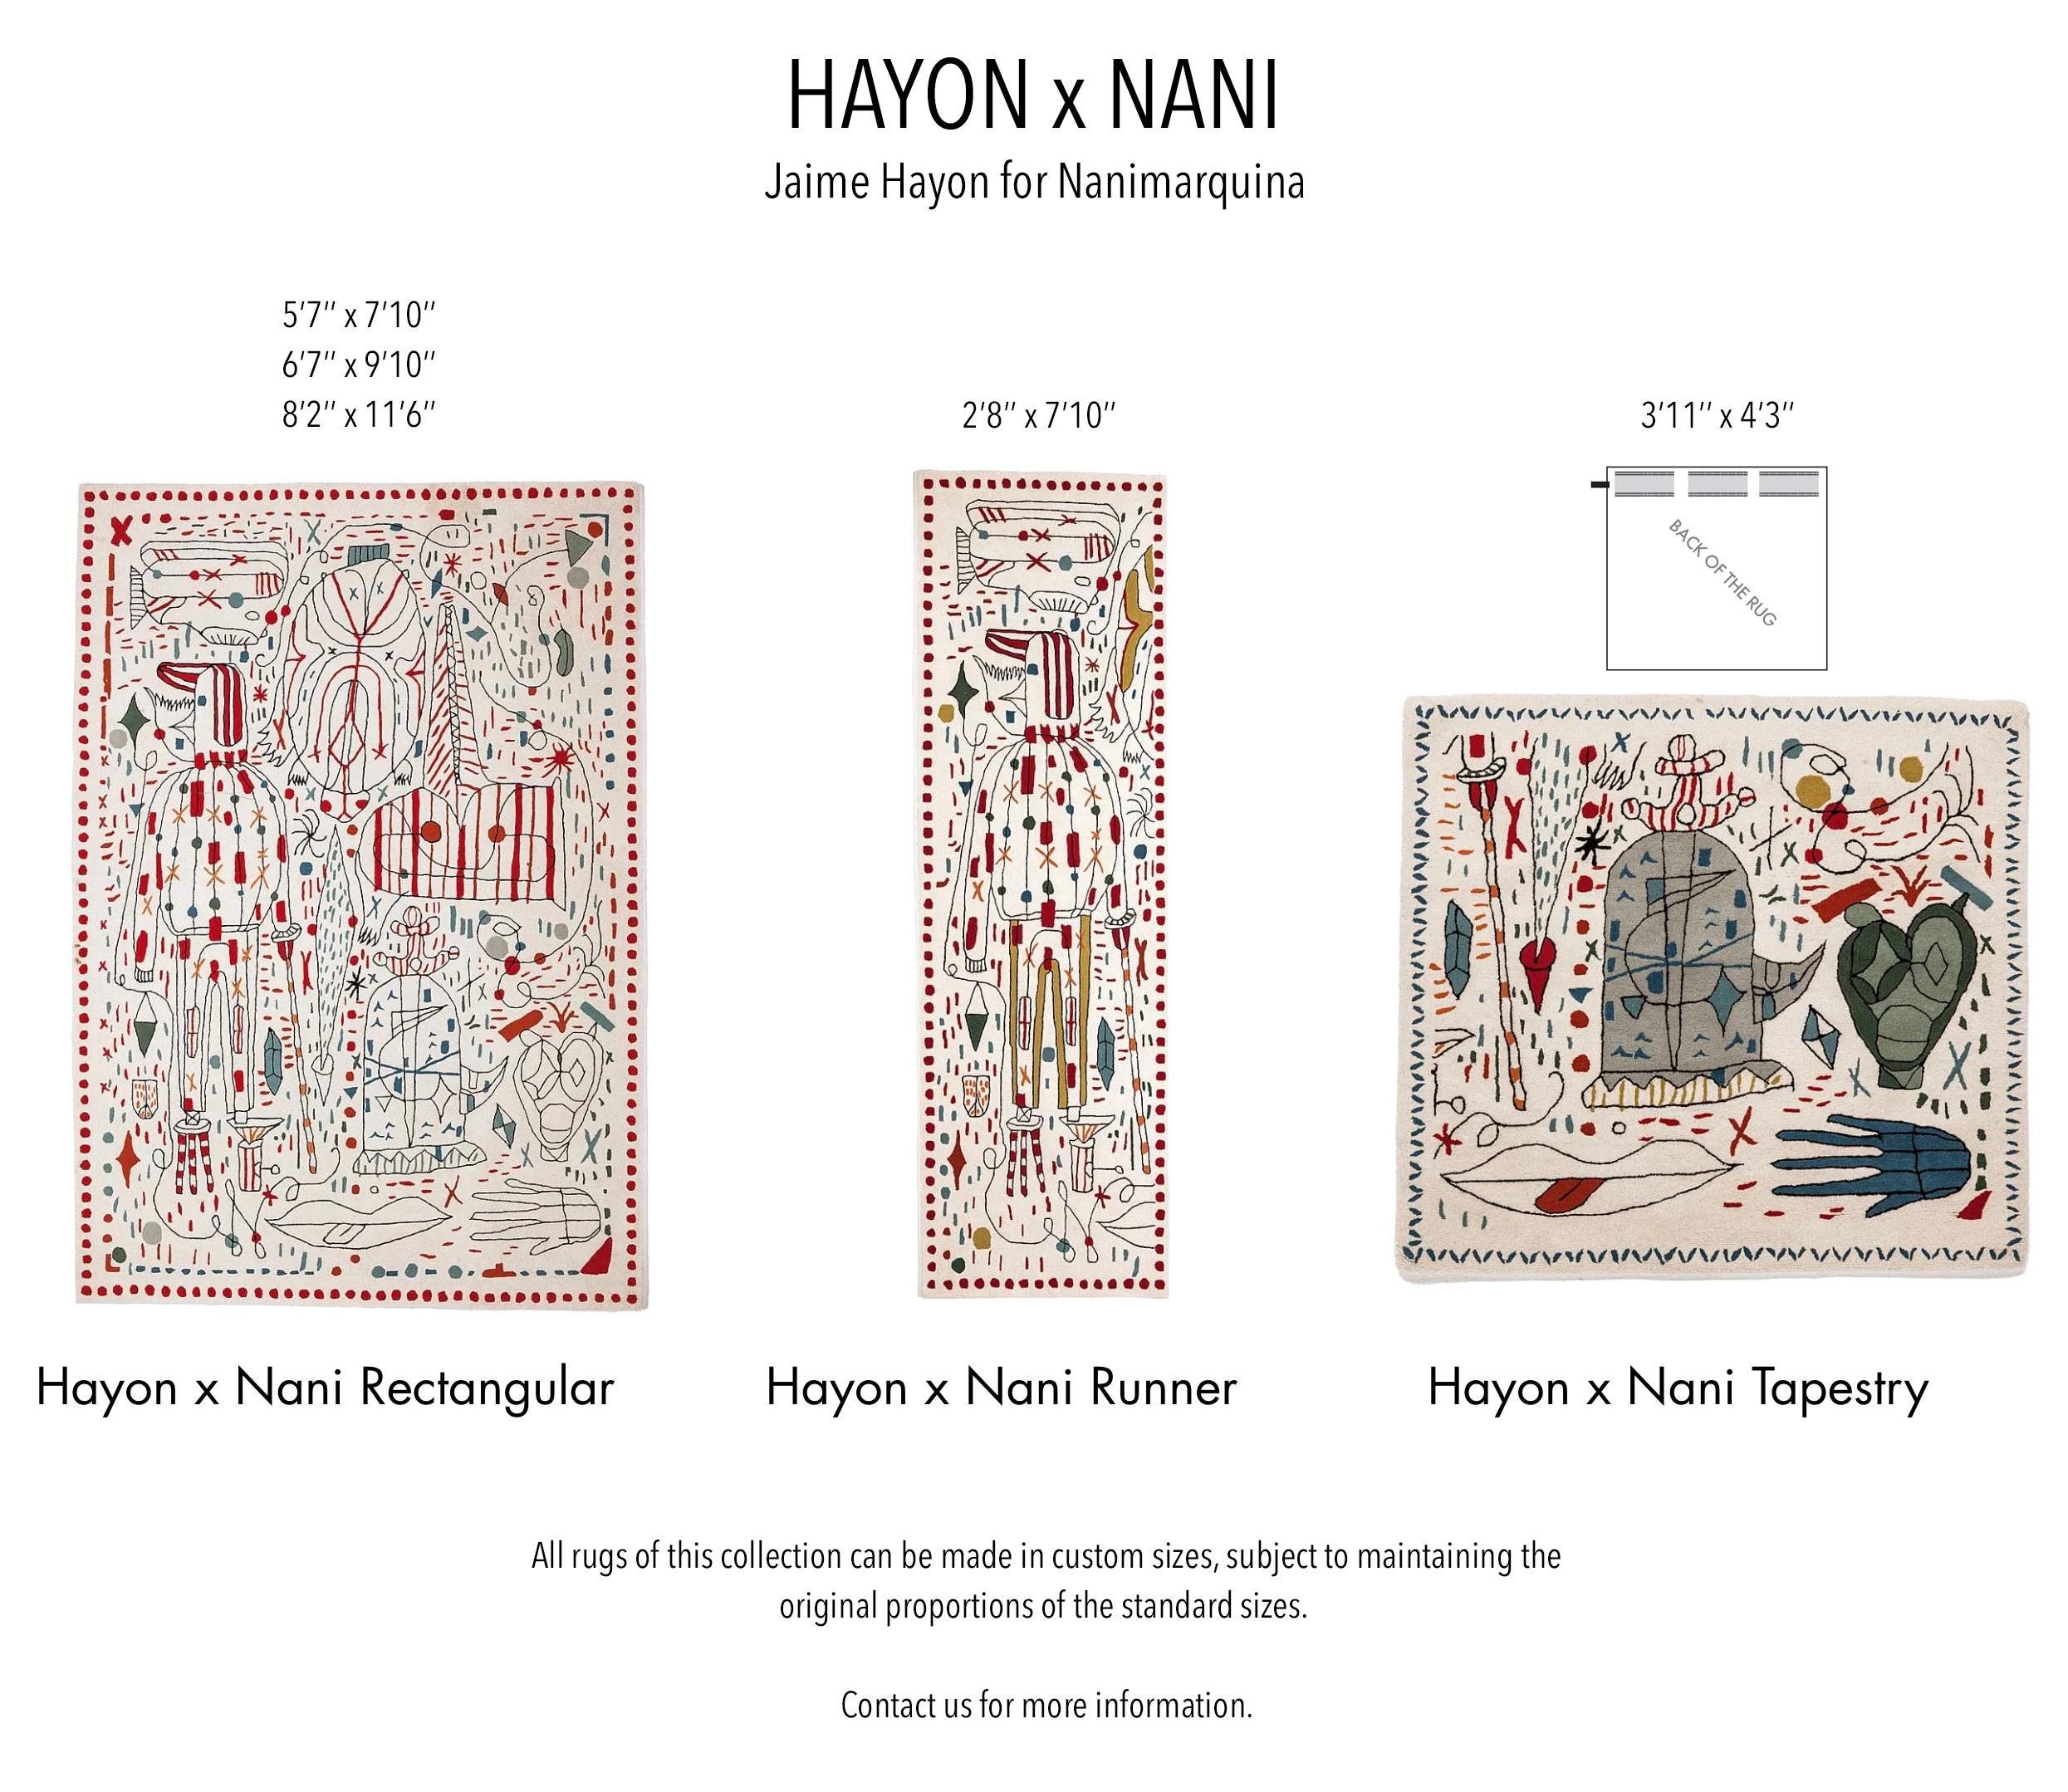 'Hayon x Nani' Hand-Tufted Rug or Tapestry by Jaime Hayon for Nanimarquina For Sale 1